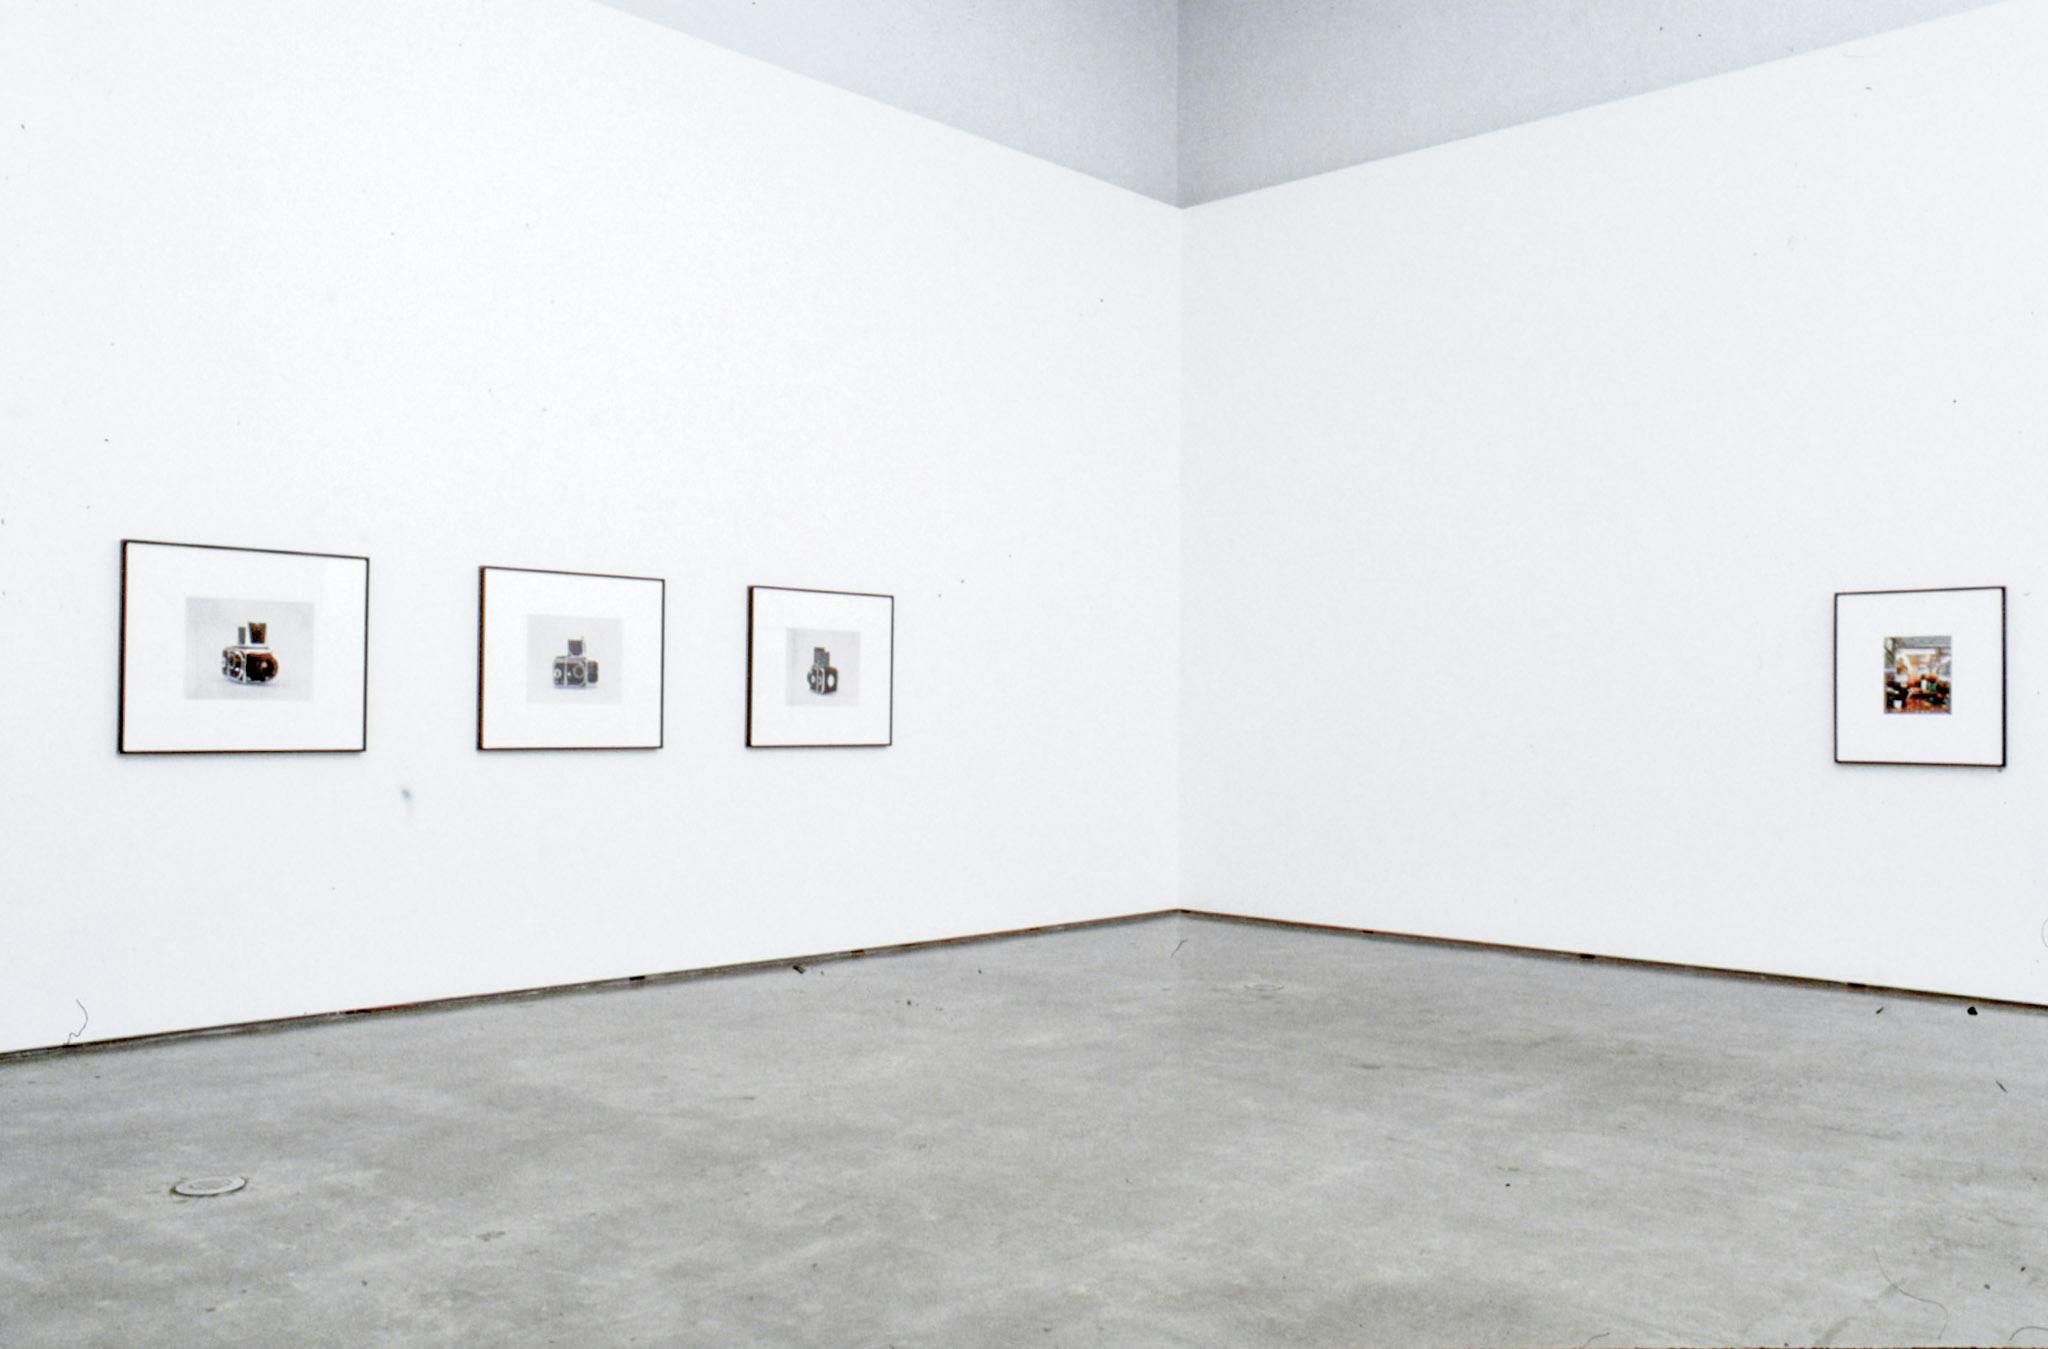 An installation image of coloured photographs on gallery walls. Three photographs of black old cameras are on the left wall. The photograph on the right-side wall shows some round orange objects.